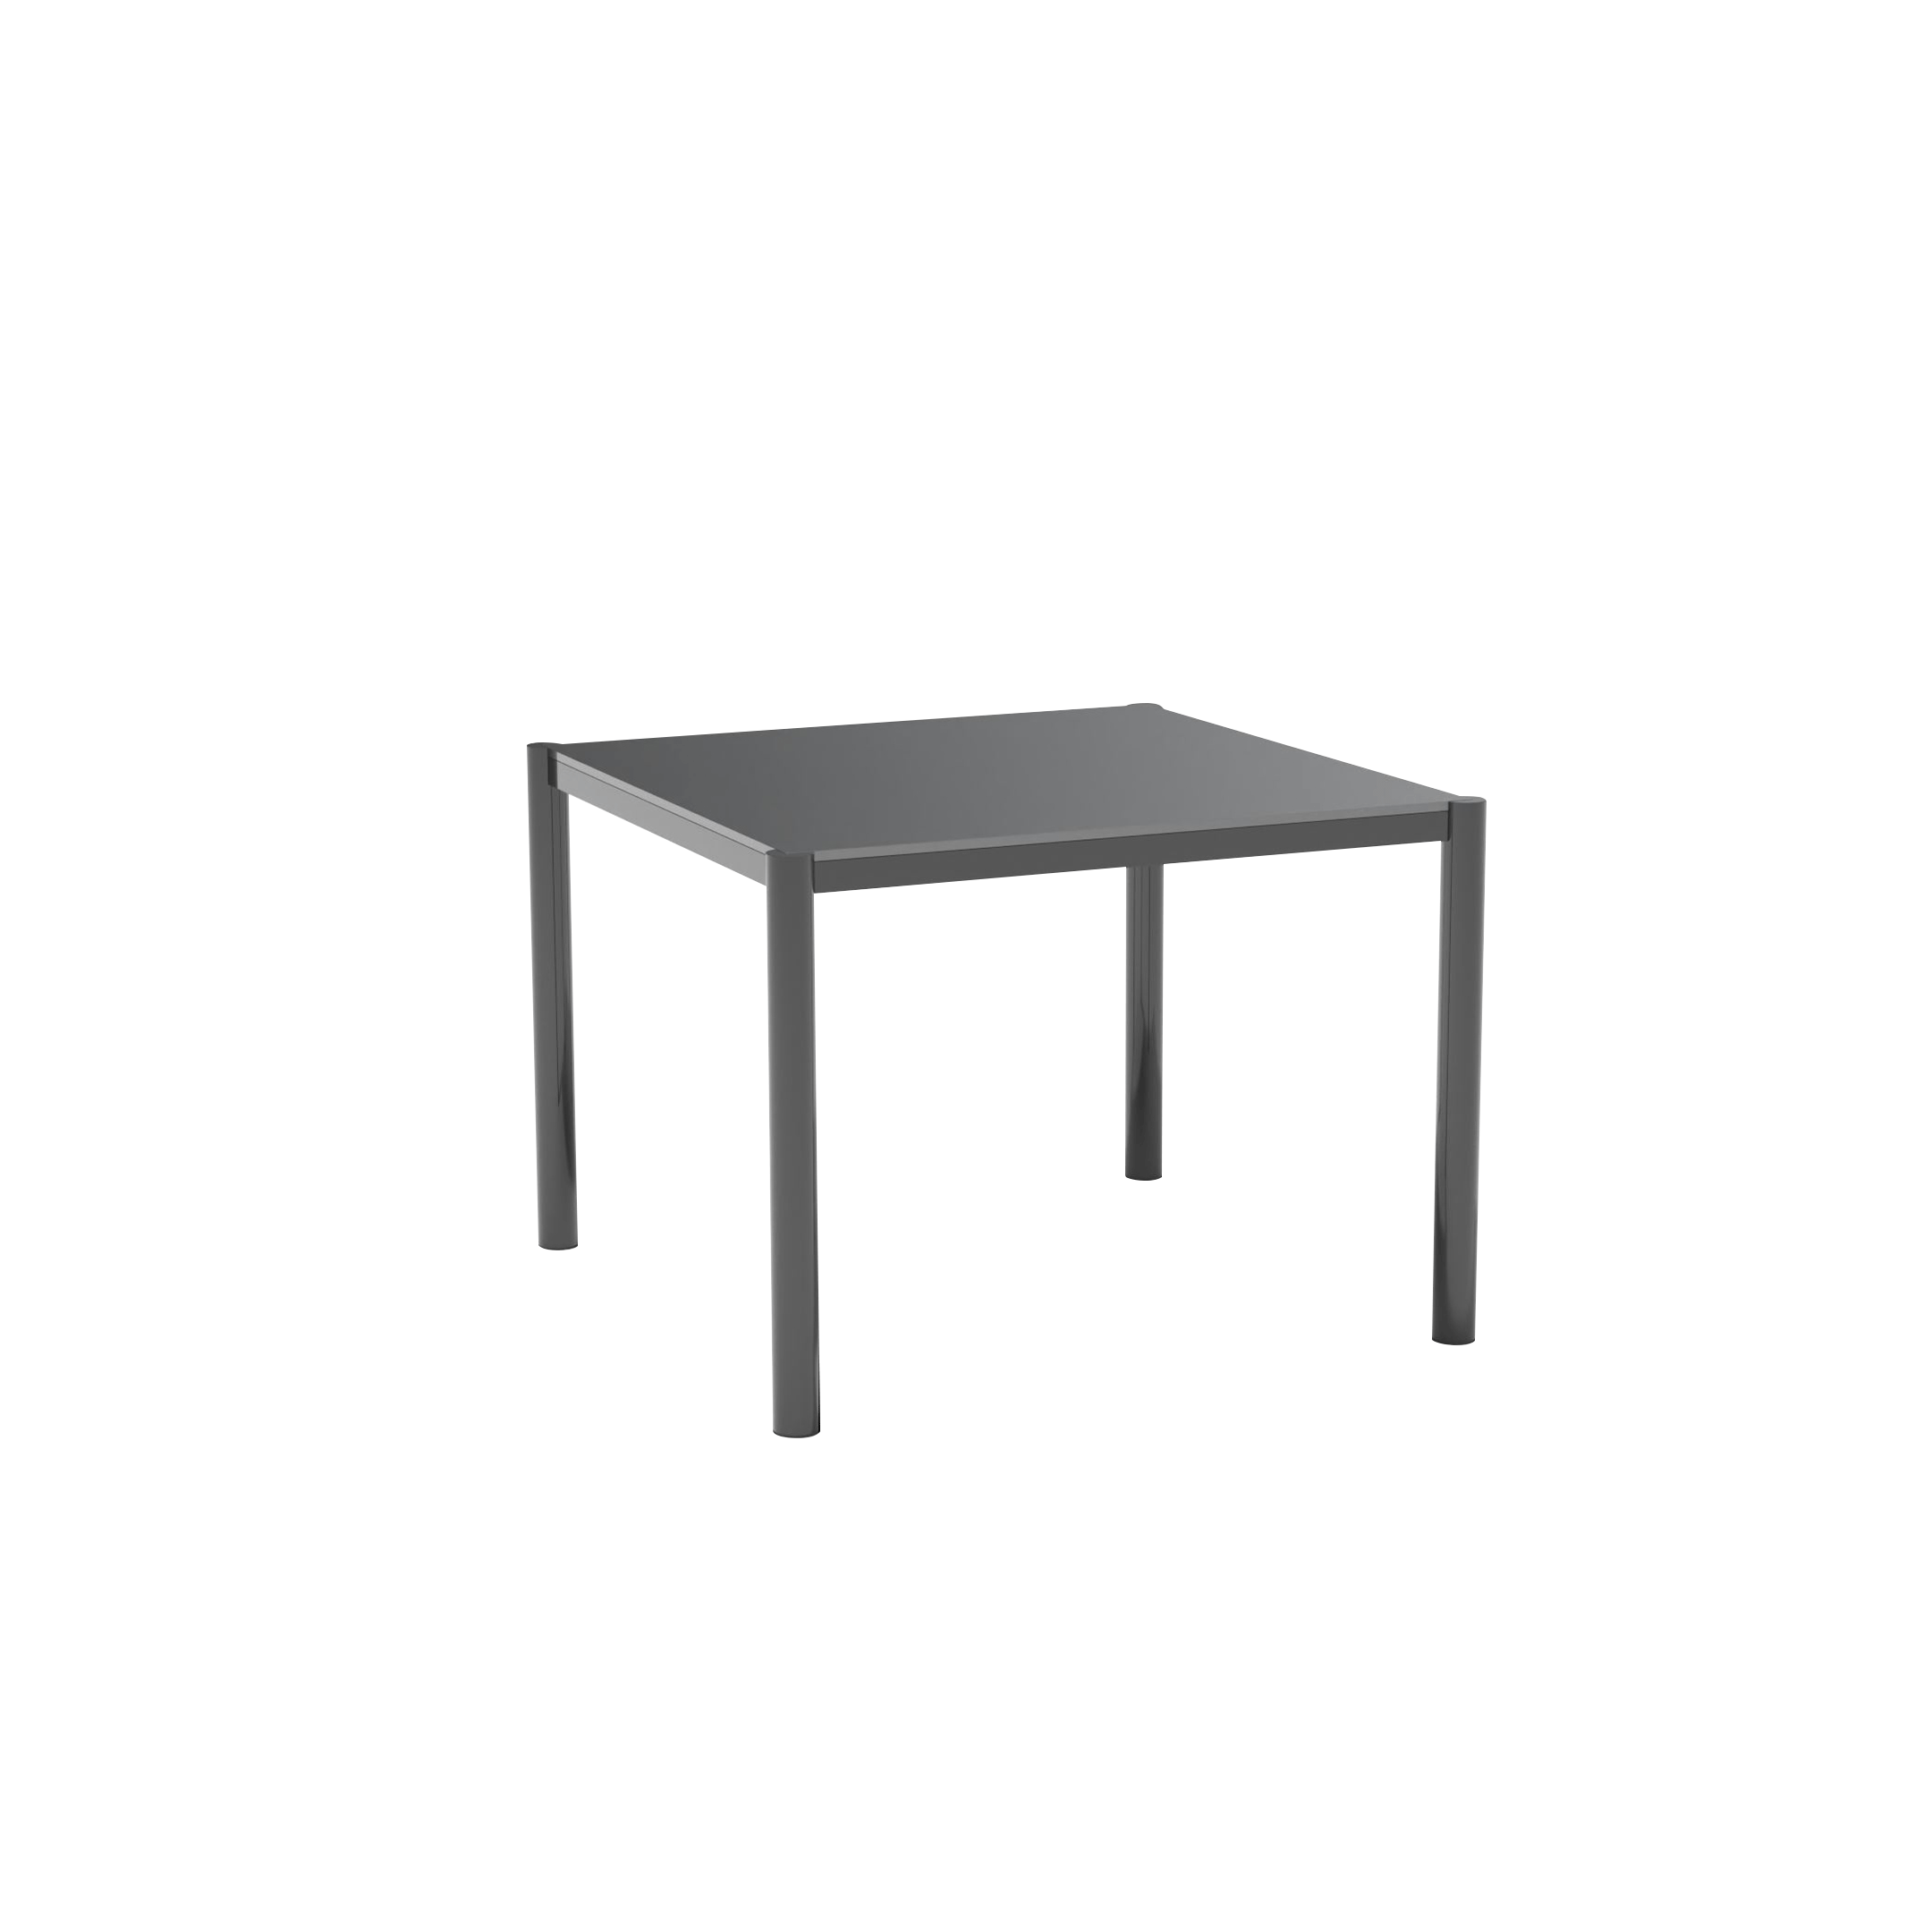 38" Get-Together Table shown in Black with Tempered Glass